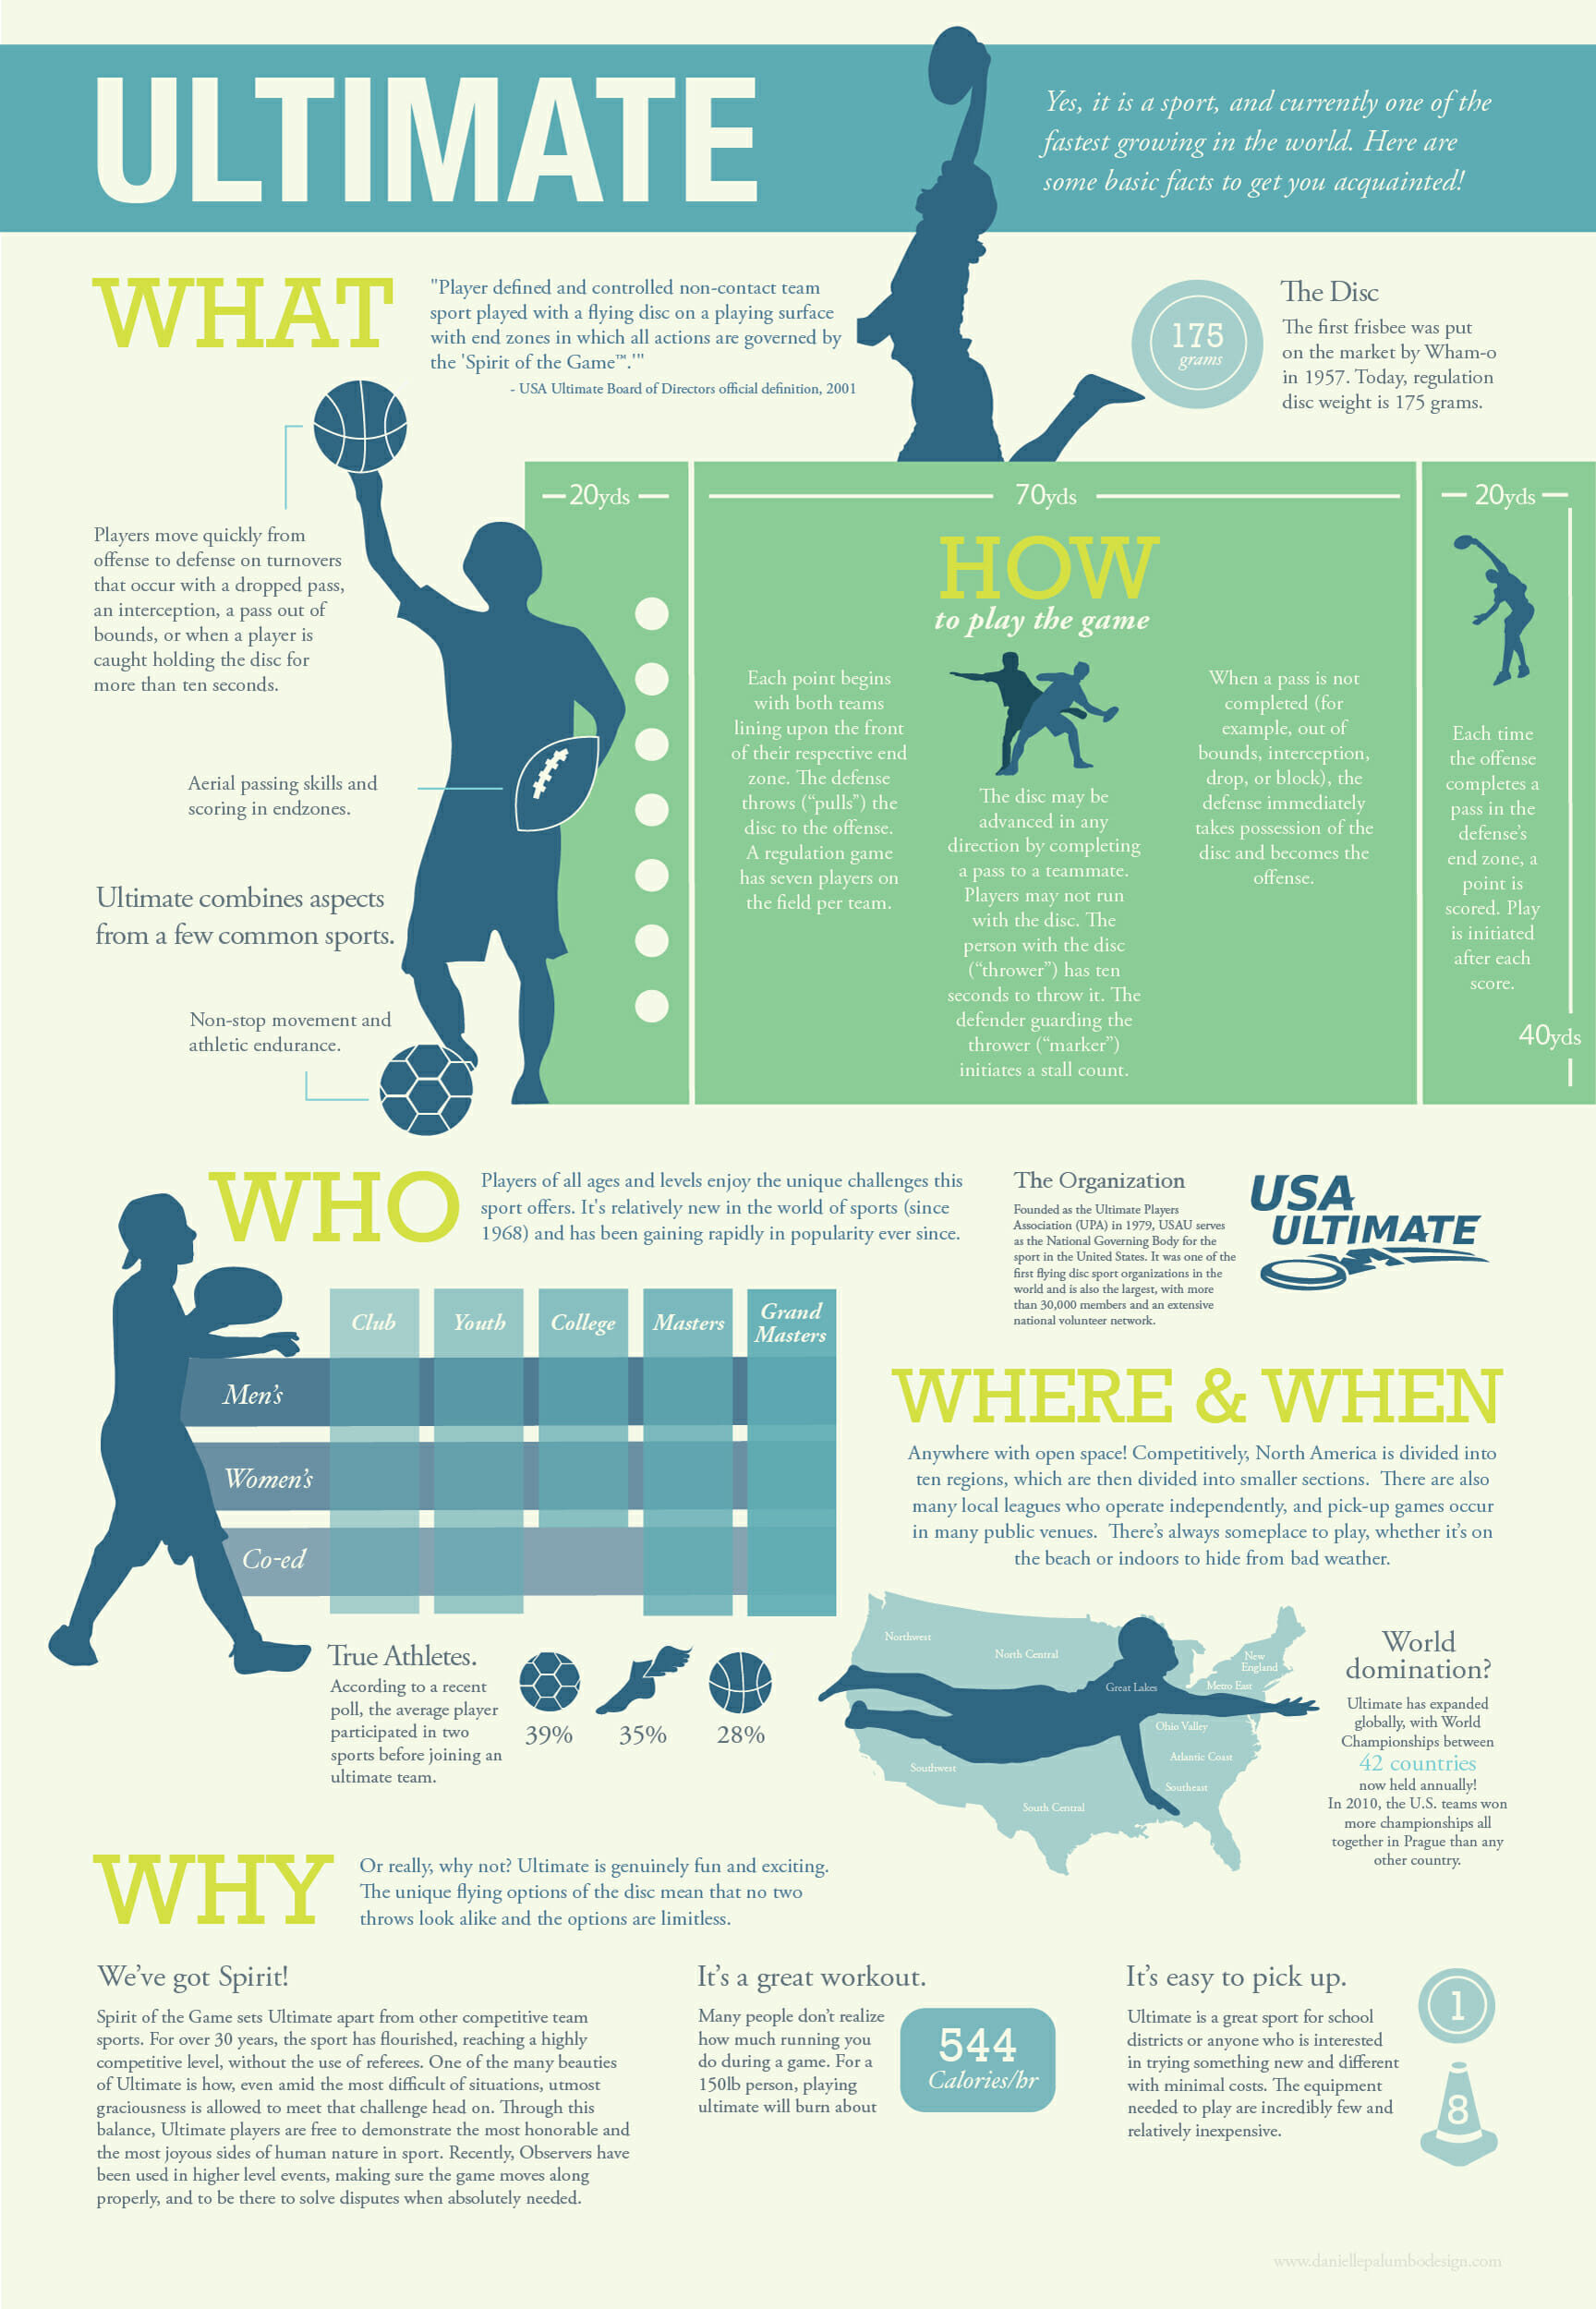 Infographic about Ultimate by Danielle Palumbo.